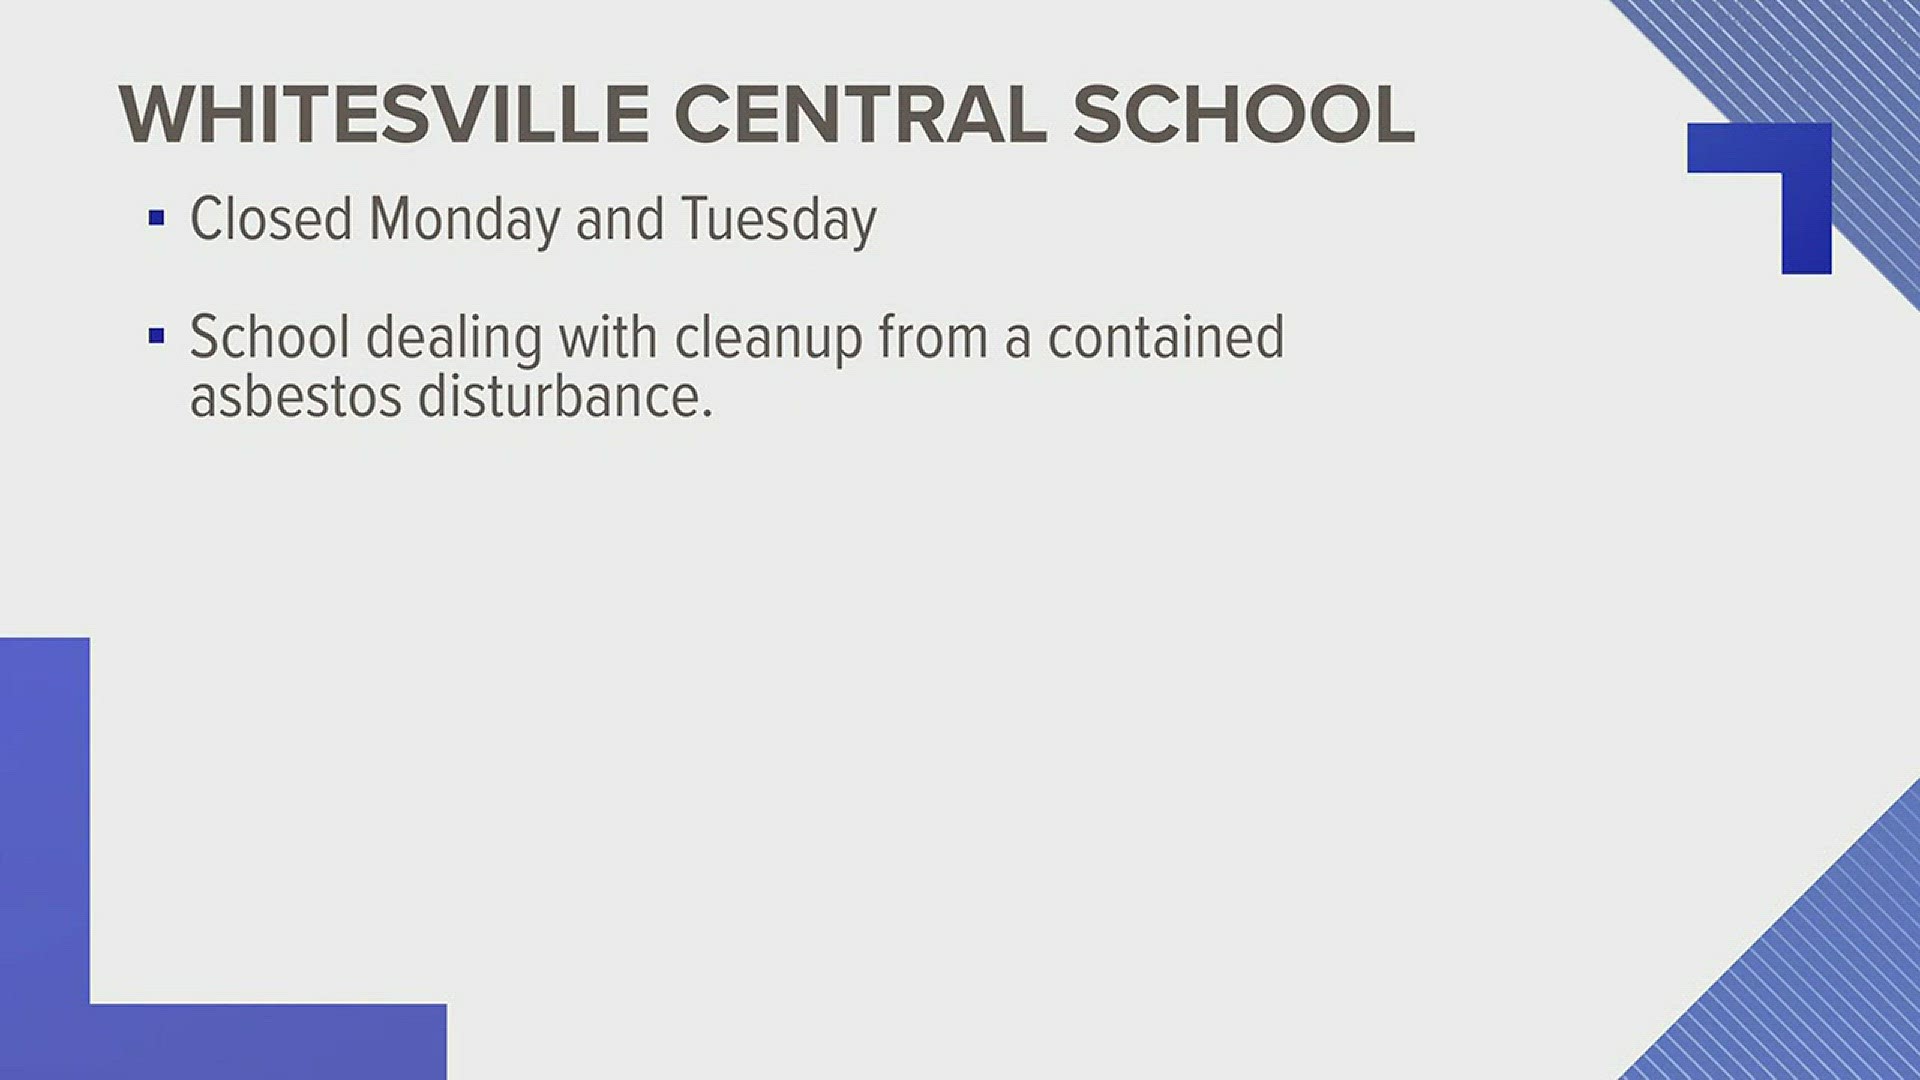 Whitesville Central School closed Monday & Tuesday